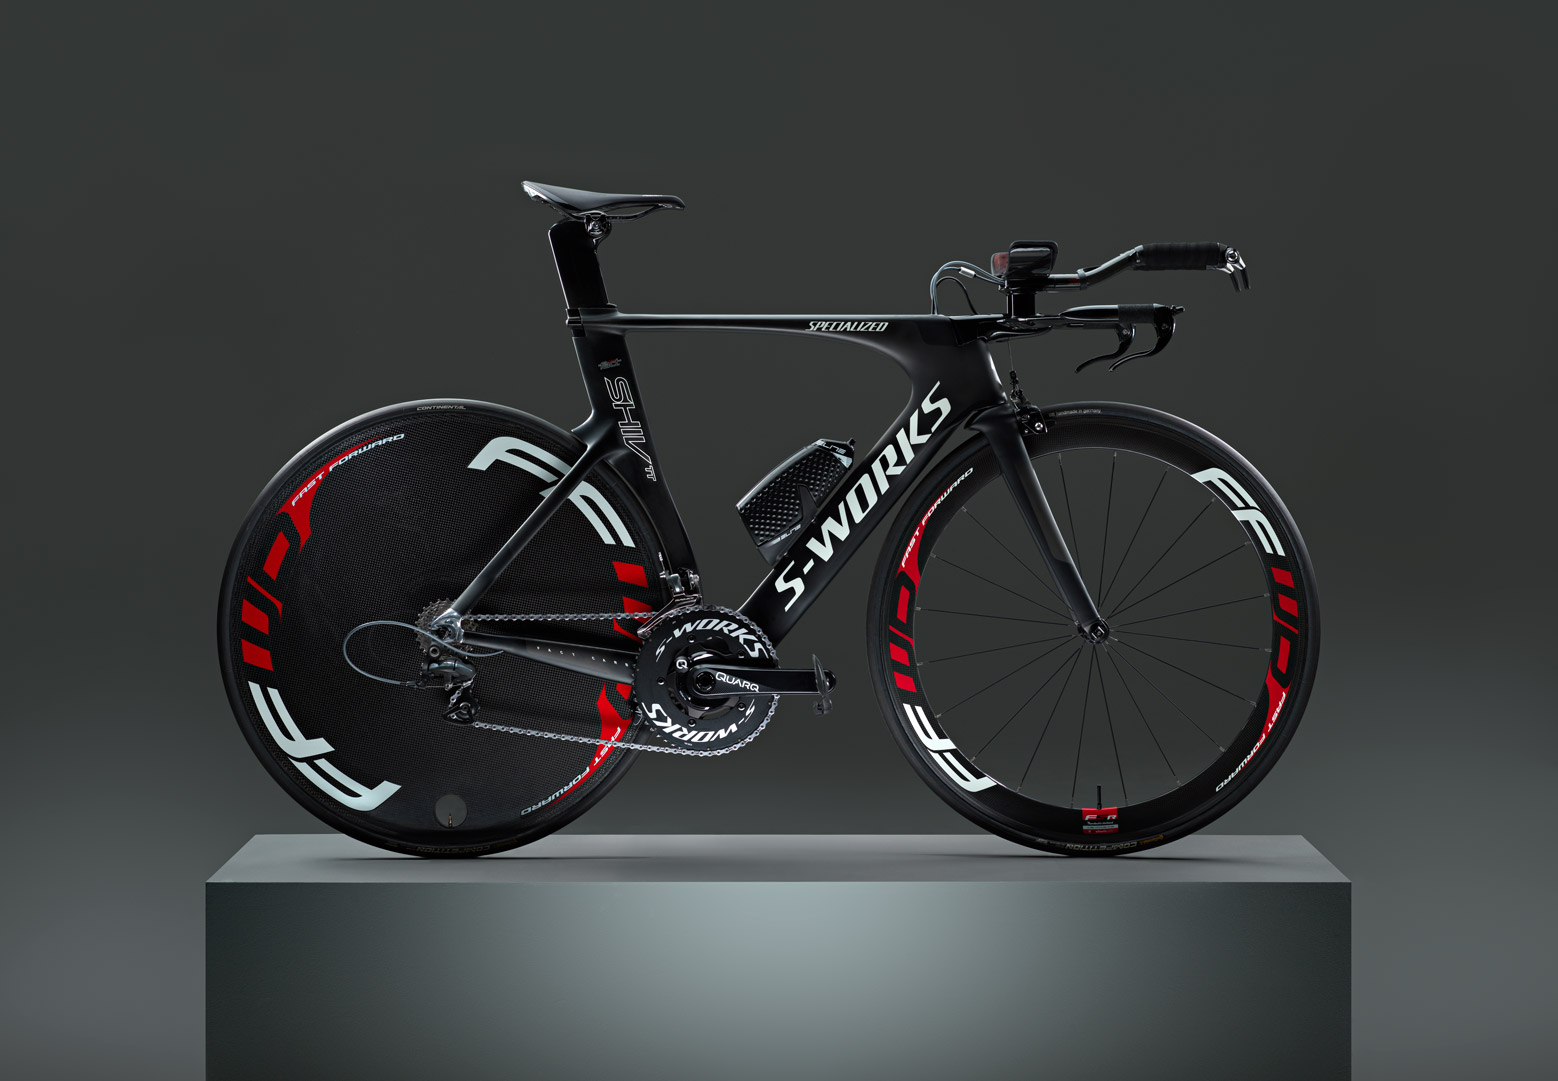 Product photo of a Specialized time-trial racing bicycle